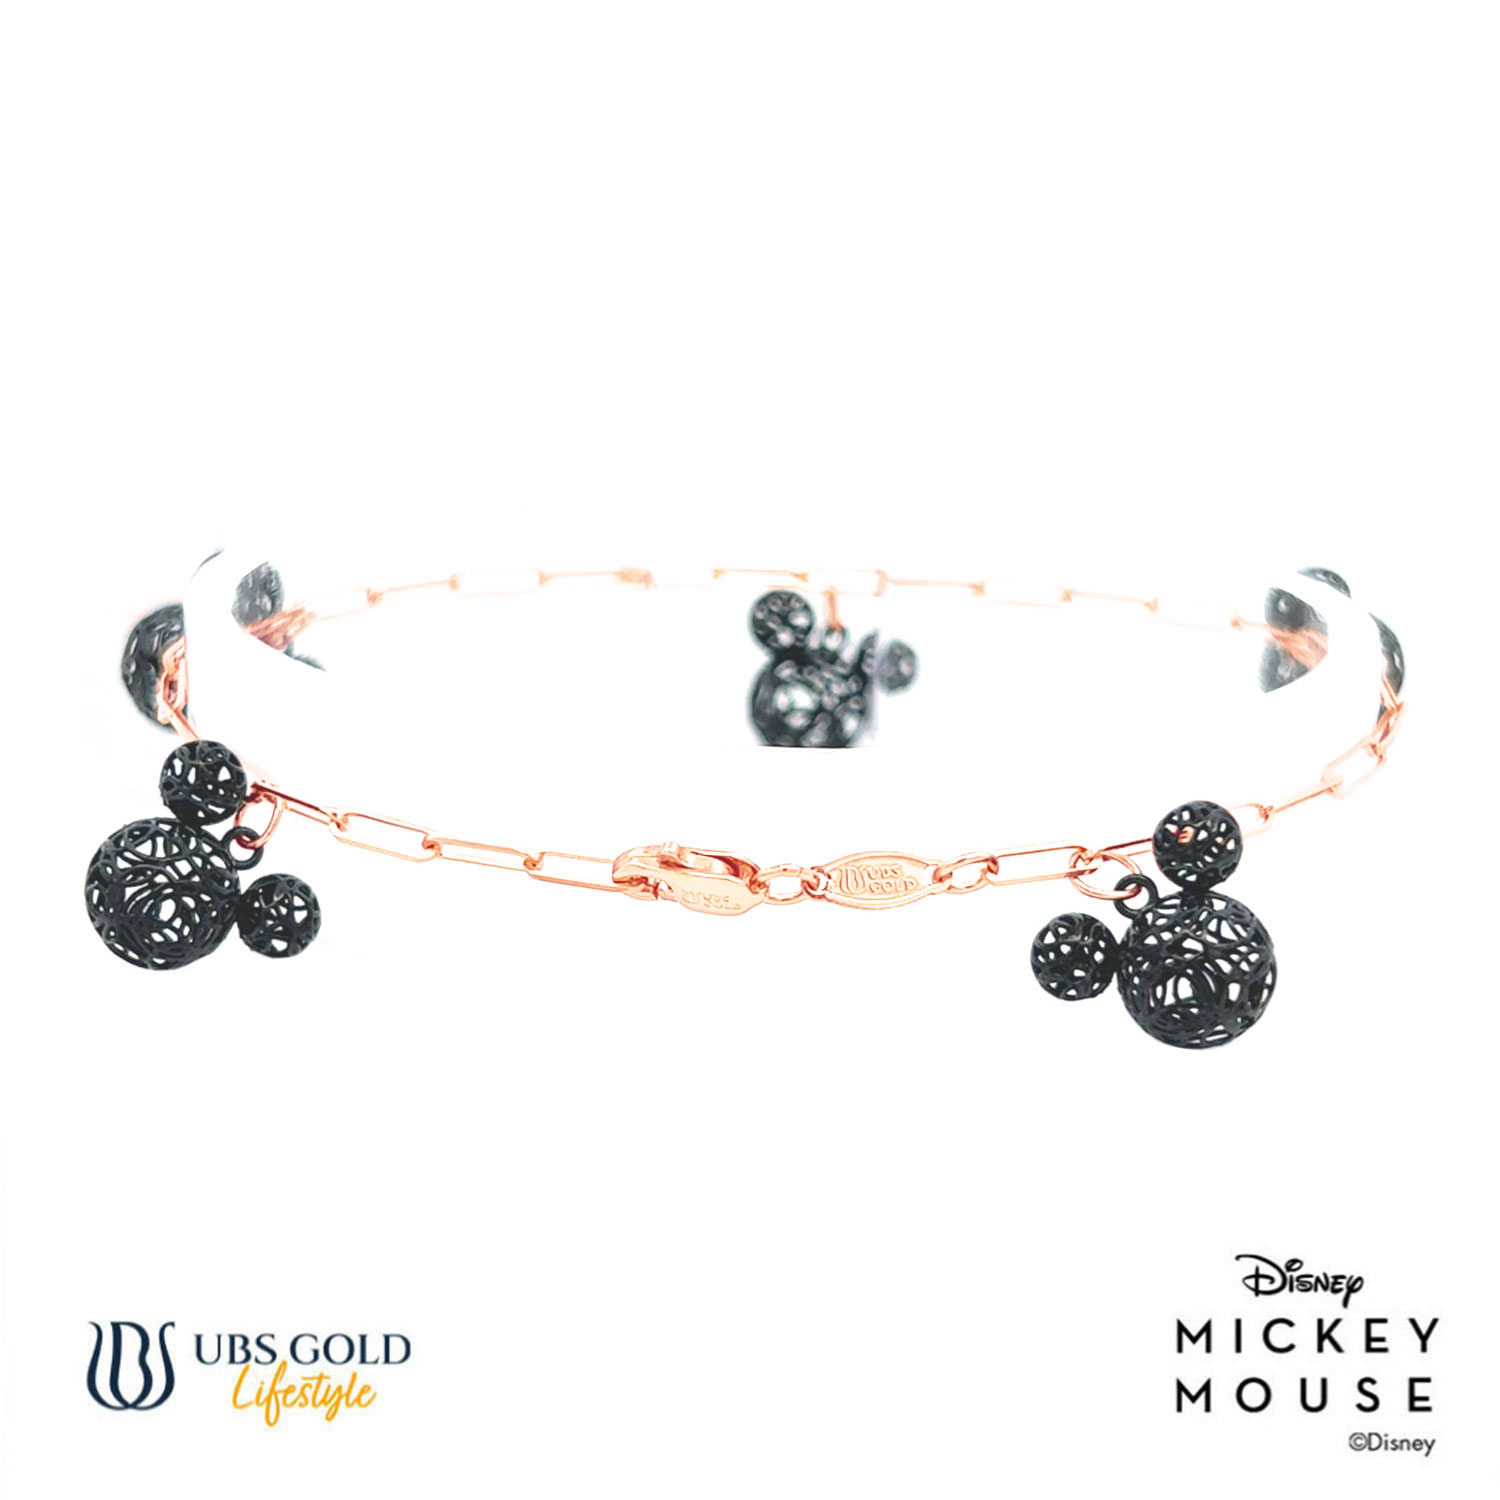 UBS Gold Gelang Emas Disney Mickey Mouse - Kgy0110 - 17K